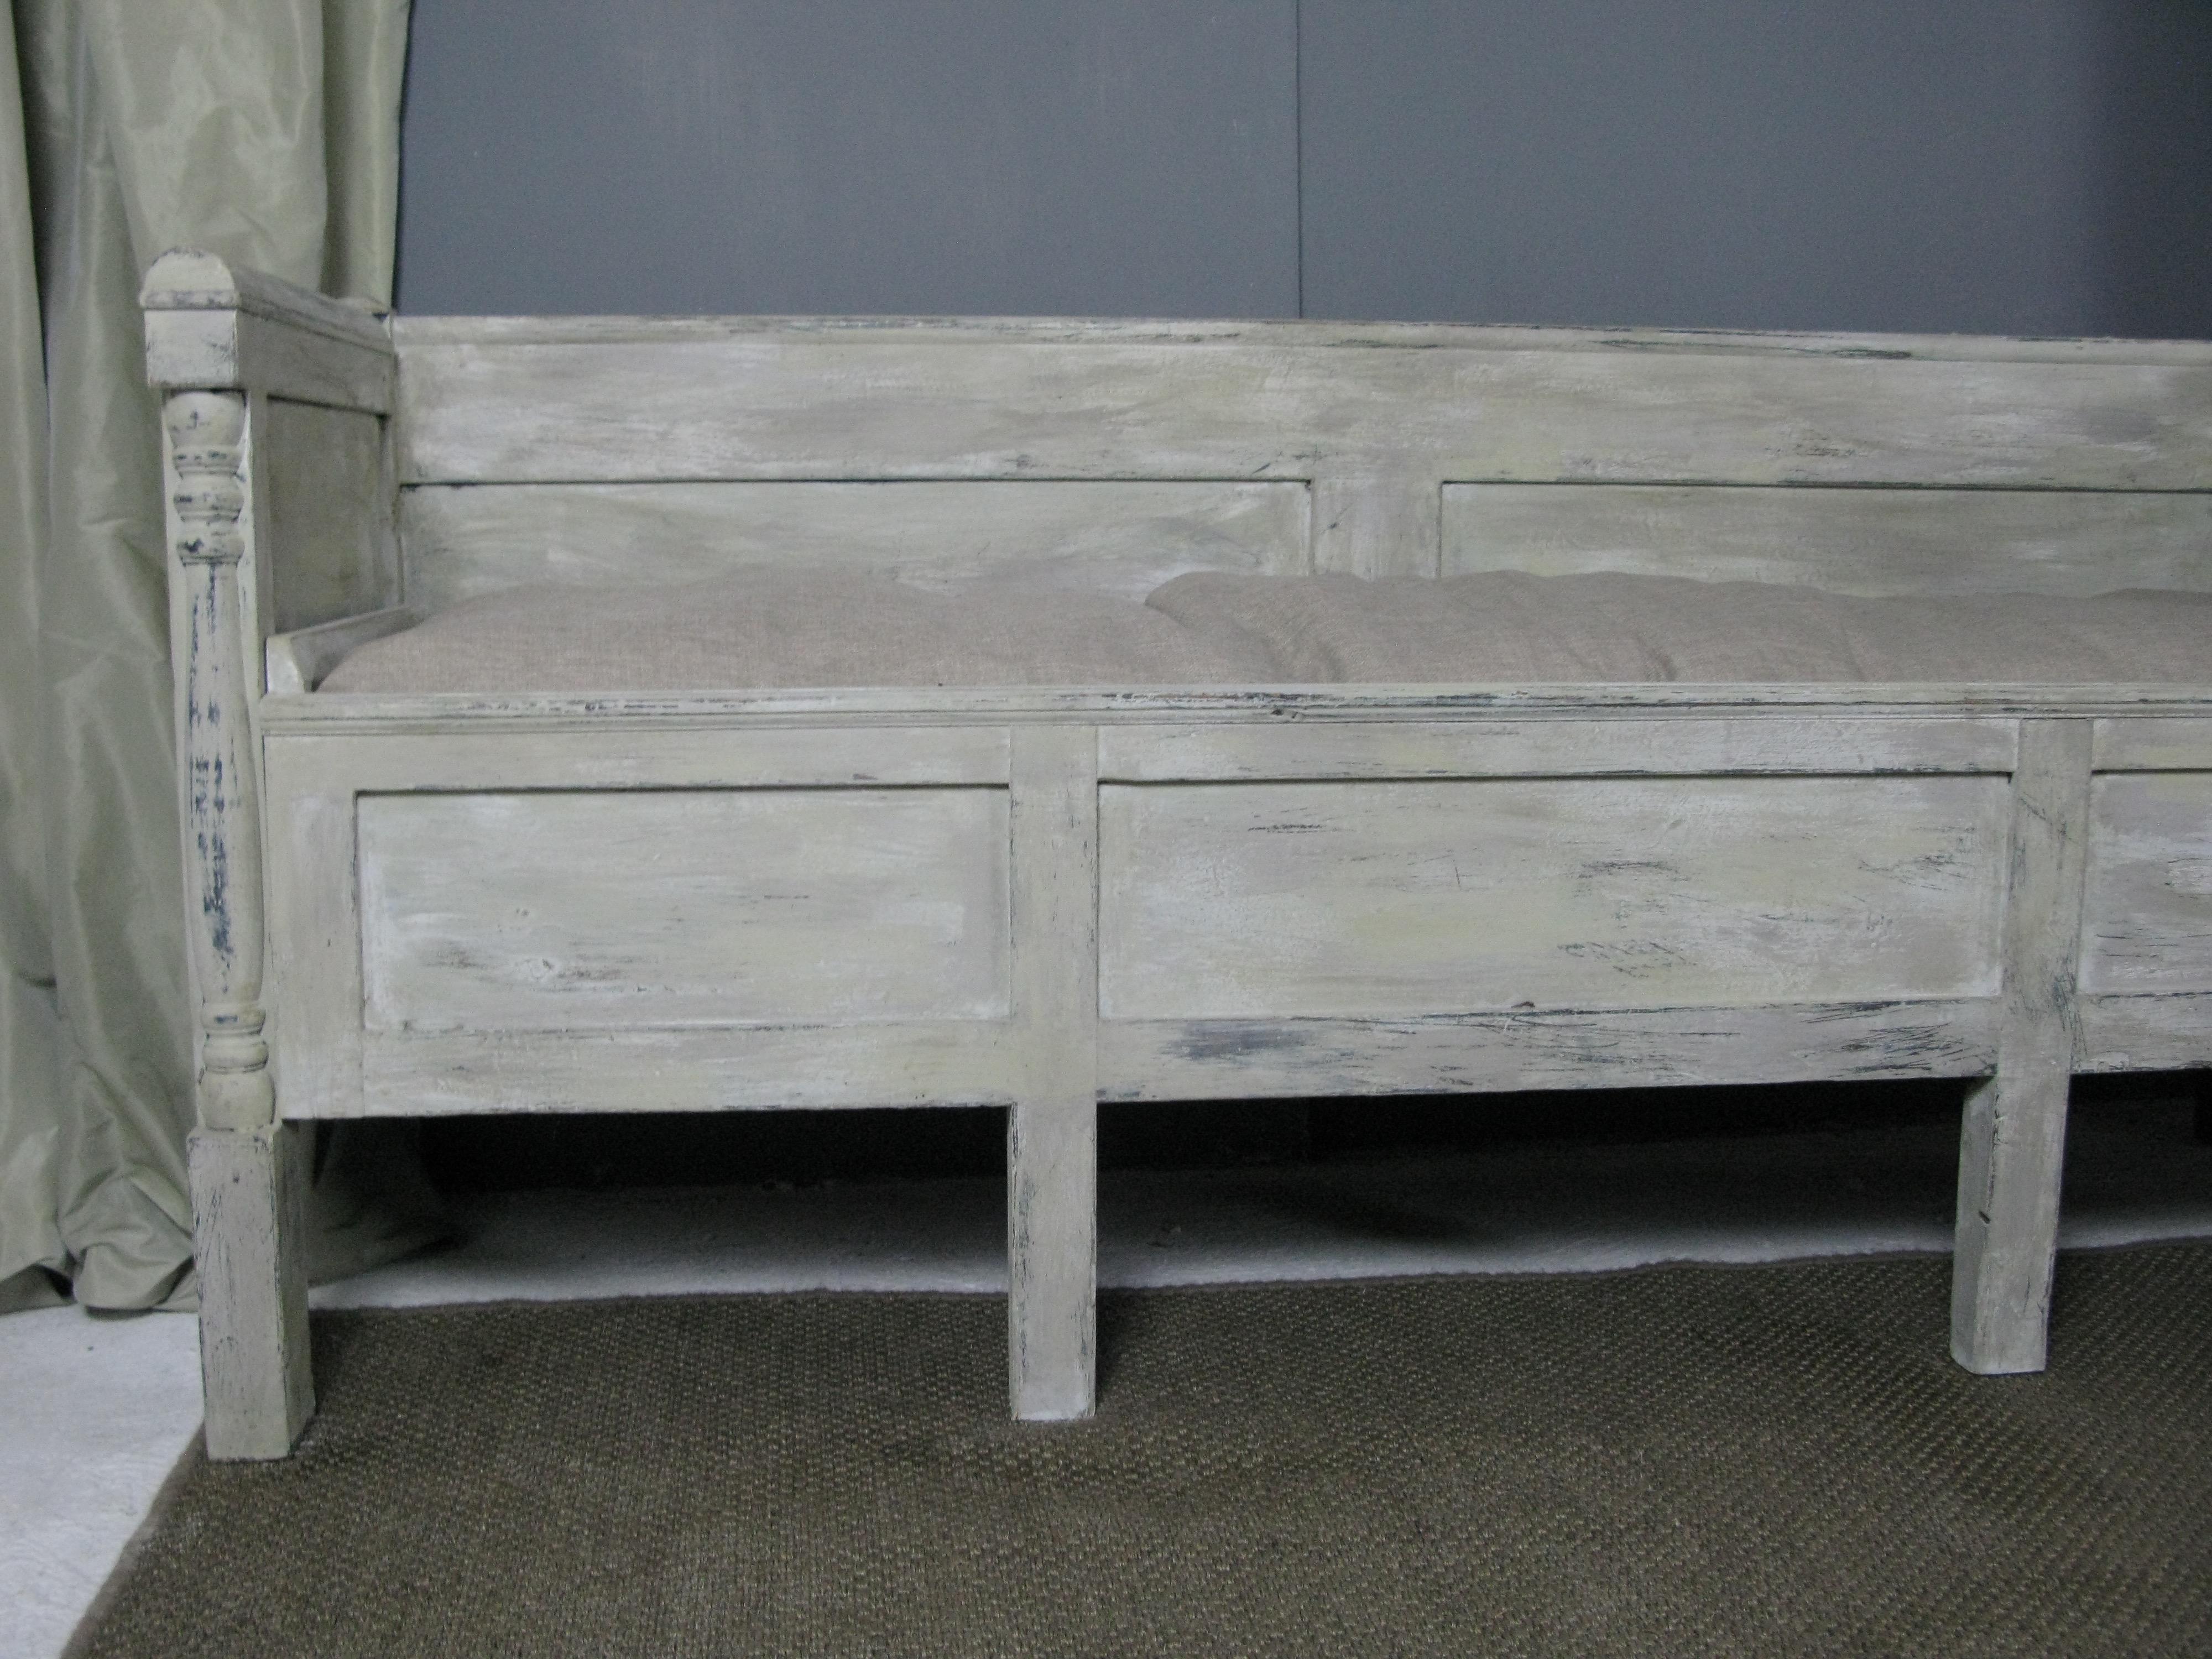 Cold-Painted Swedish Sofa, 19th Century, Country Piece, Country Bench